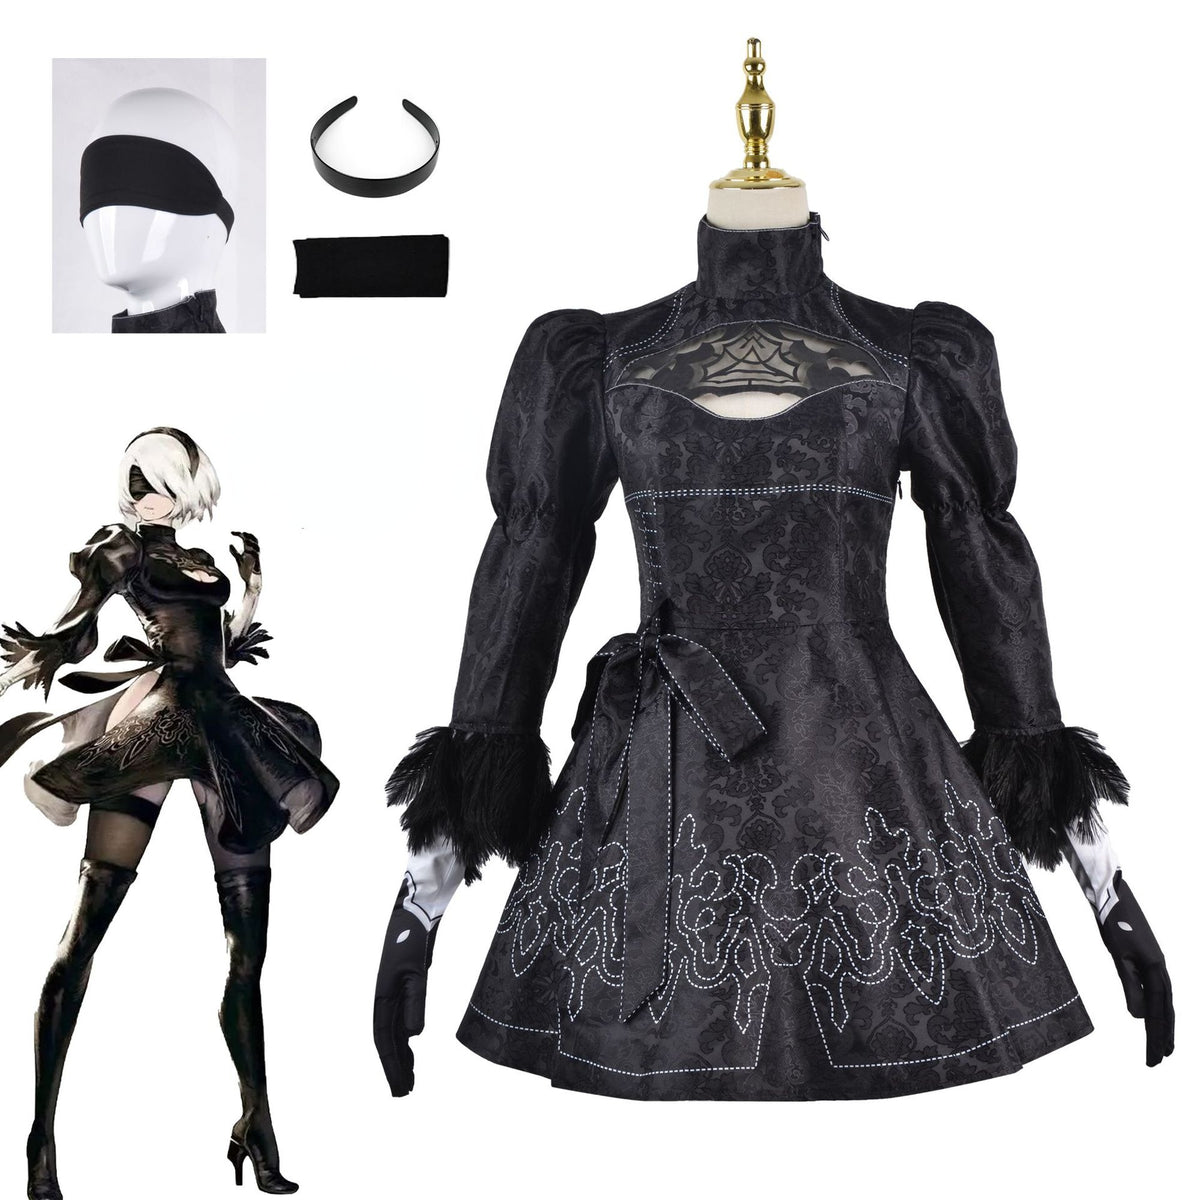 Nier Automata Cosplay Costume Yorha 2B sexy Outfit Games Suit Women Role Play Costumes Girls Halloween Party Dress